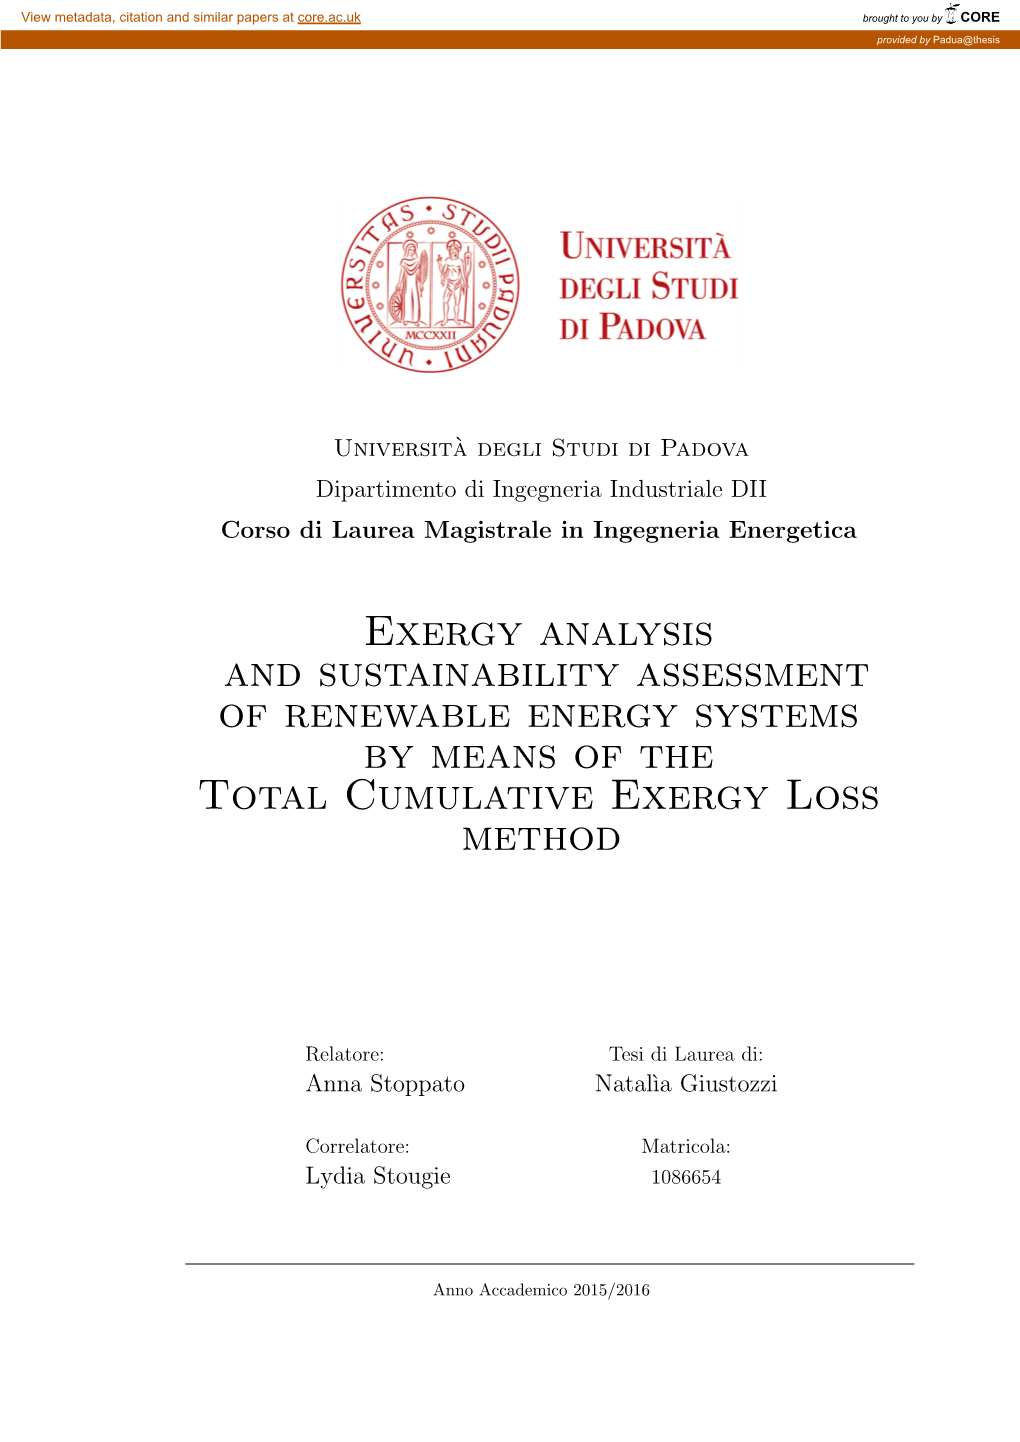 Exergy Analysis and Sustainability Assessment of Renewable Energy Systems by Means of the Total Cumulative Exergy Loss Method